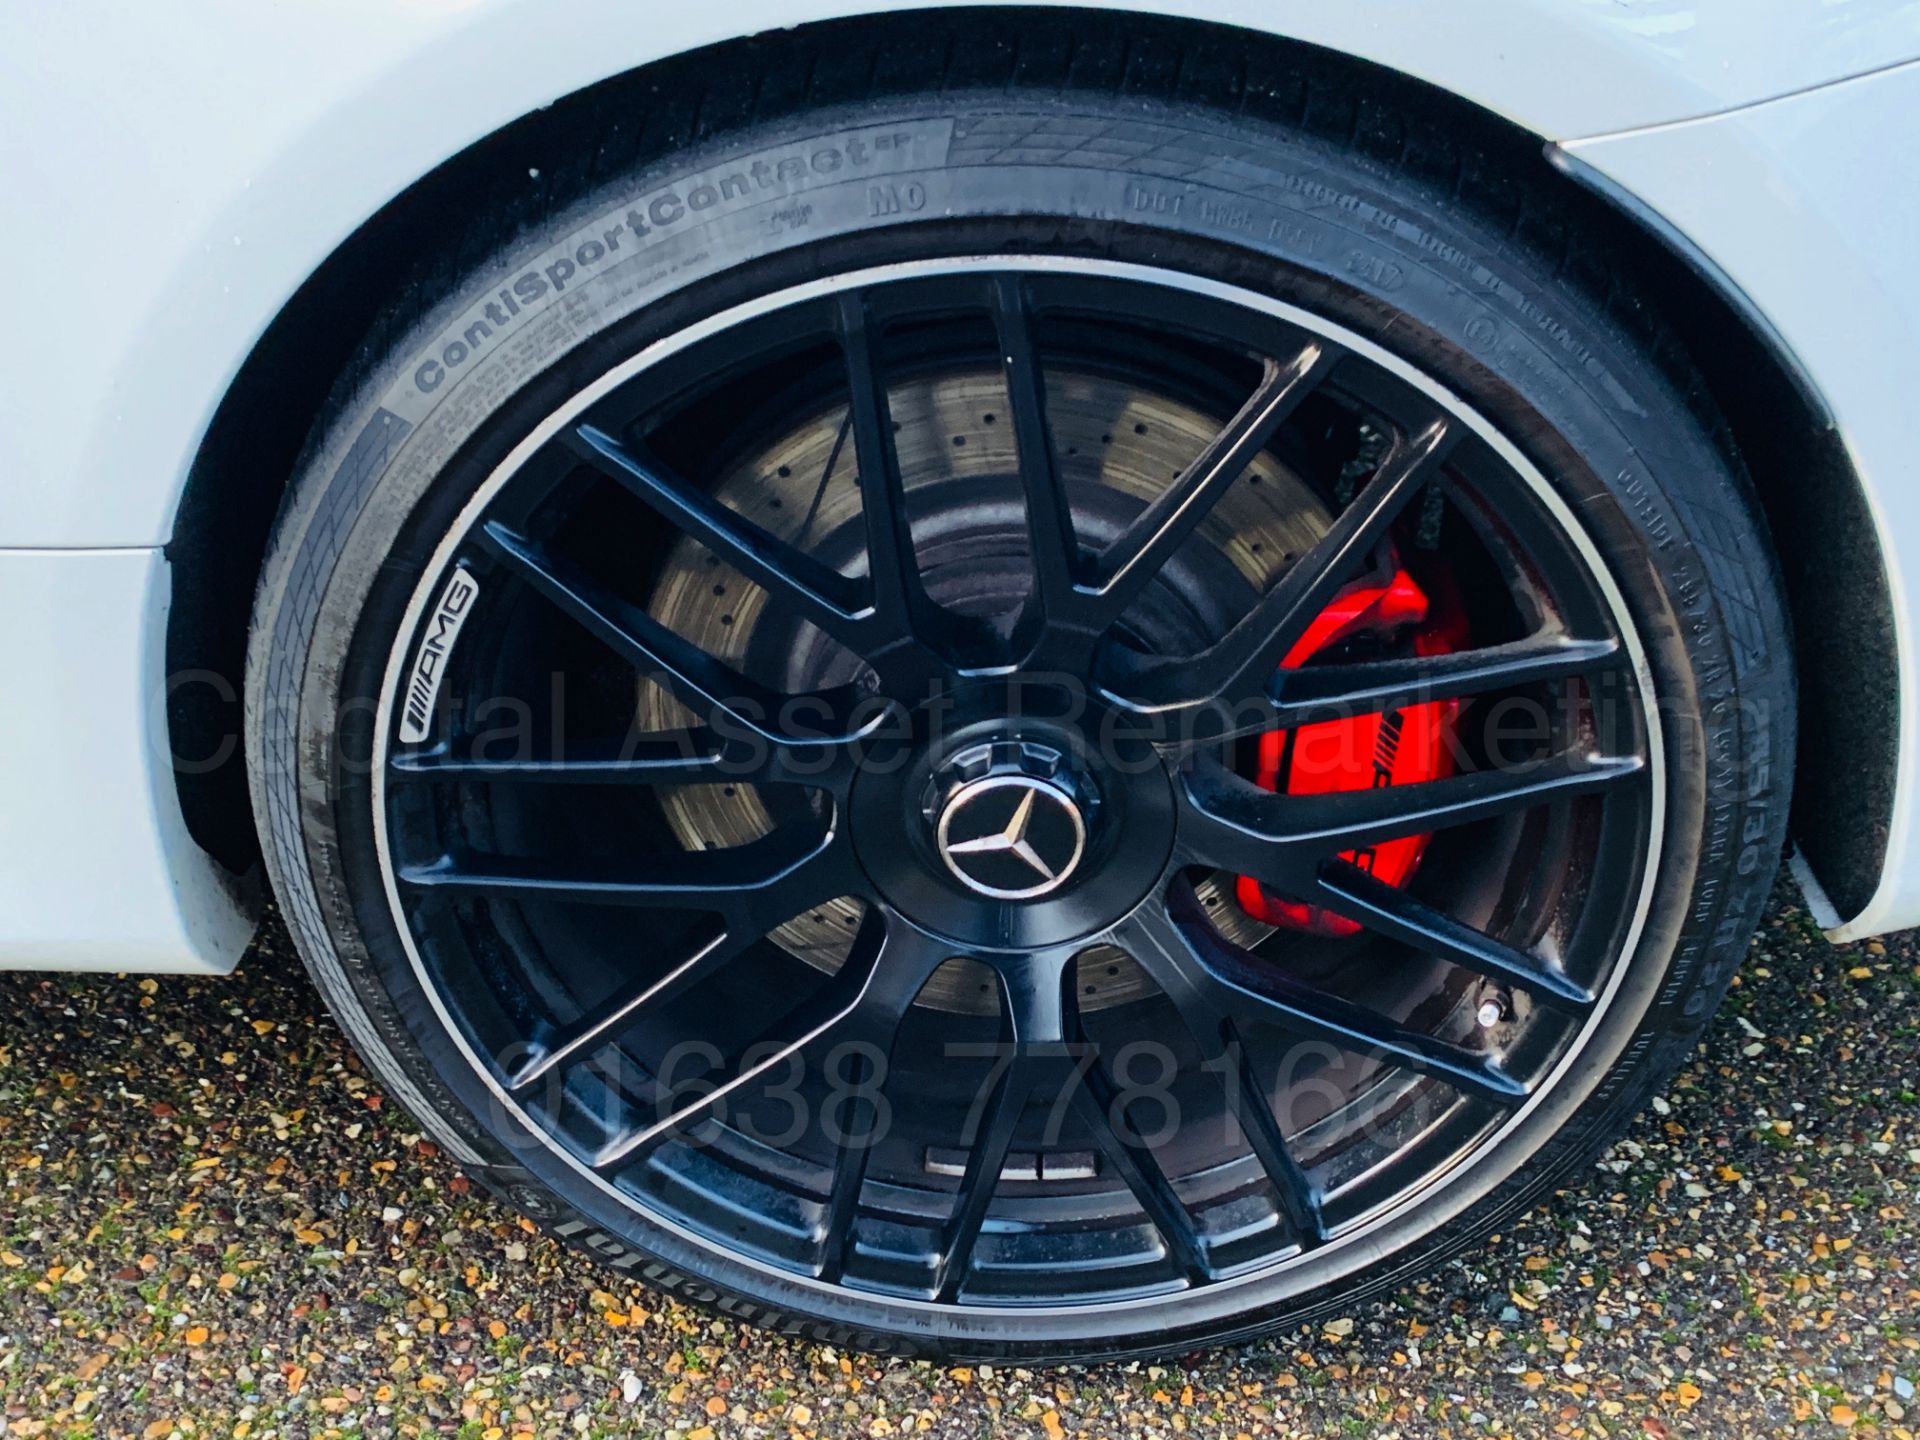 (On Sale) MERCEDES-BENZ AMG C63-S *CABRIOLET* (67 REG) '4.0 BI-TURBO -510 BHP - AUTO' *FULLY LOADED* - Image 39 of 79